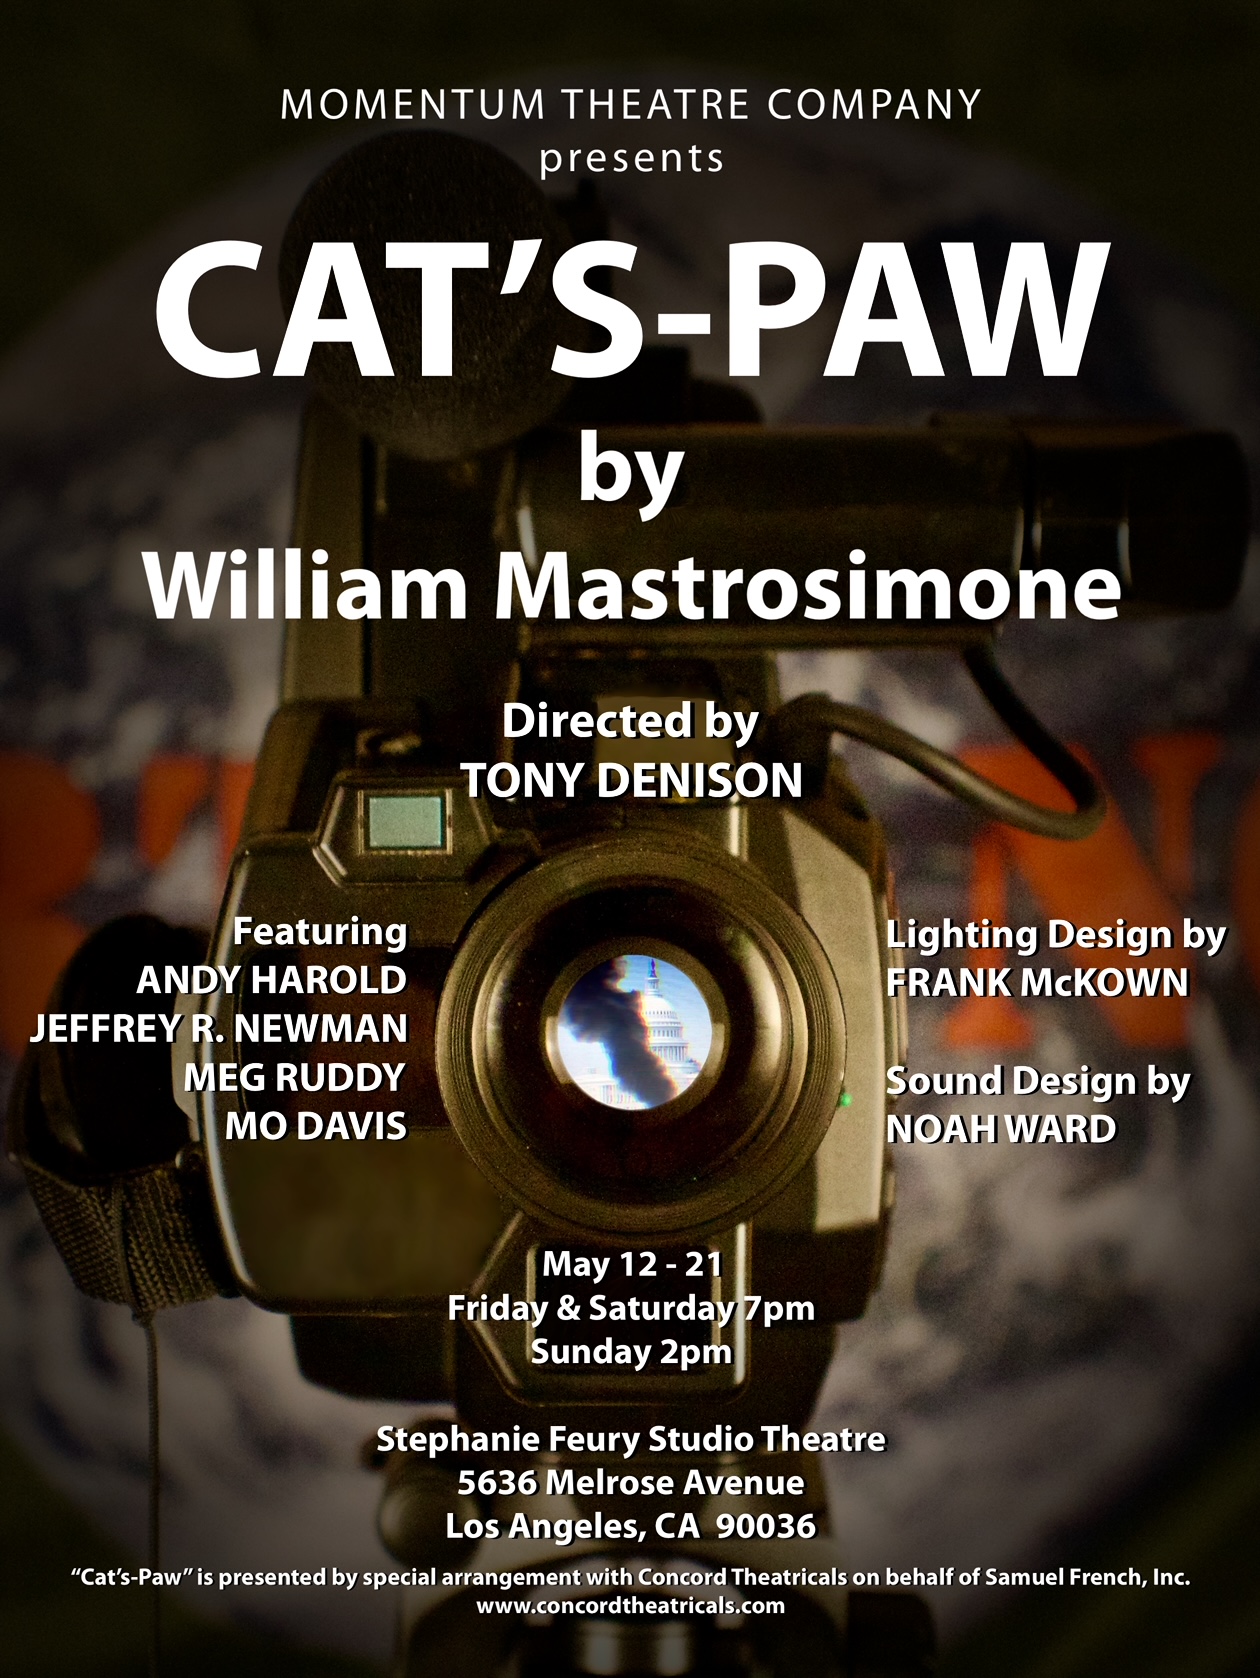 William Mastrosimone's Thriller CAT'S-PAW to be Presented by Momentum Theatre Company in May 